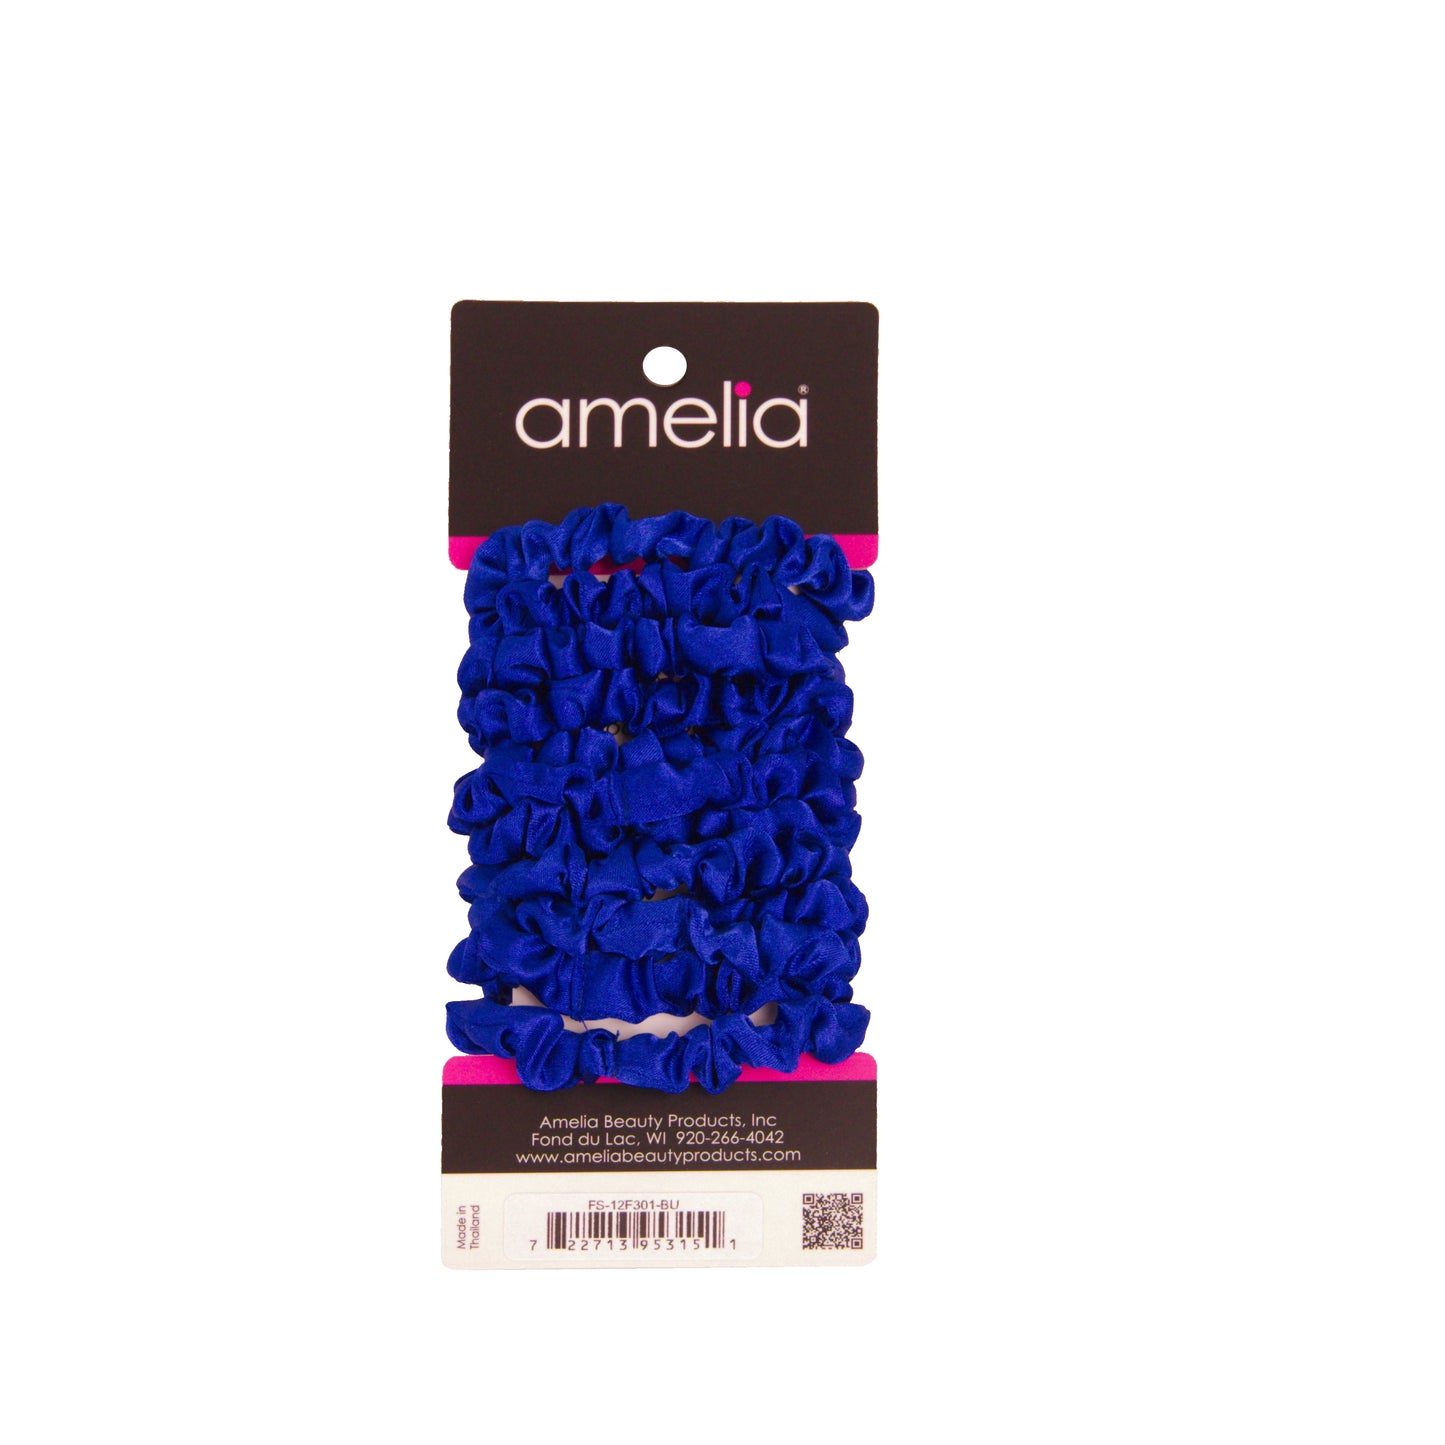 Amelia Beauty, Blue Satin Scrunchies, 2.25in Diameter, Gentle on Hair, Strong Hold, No Snag, No Dents or Creases. 12 Pack